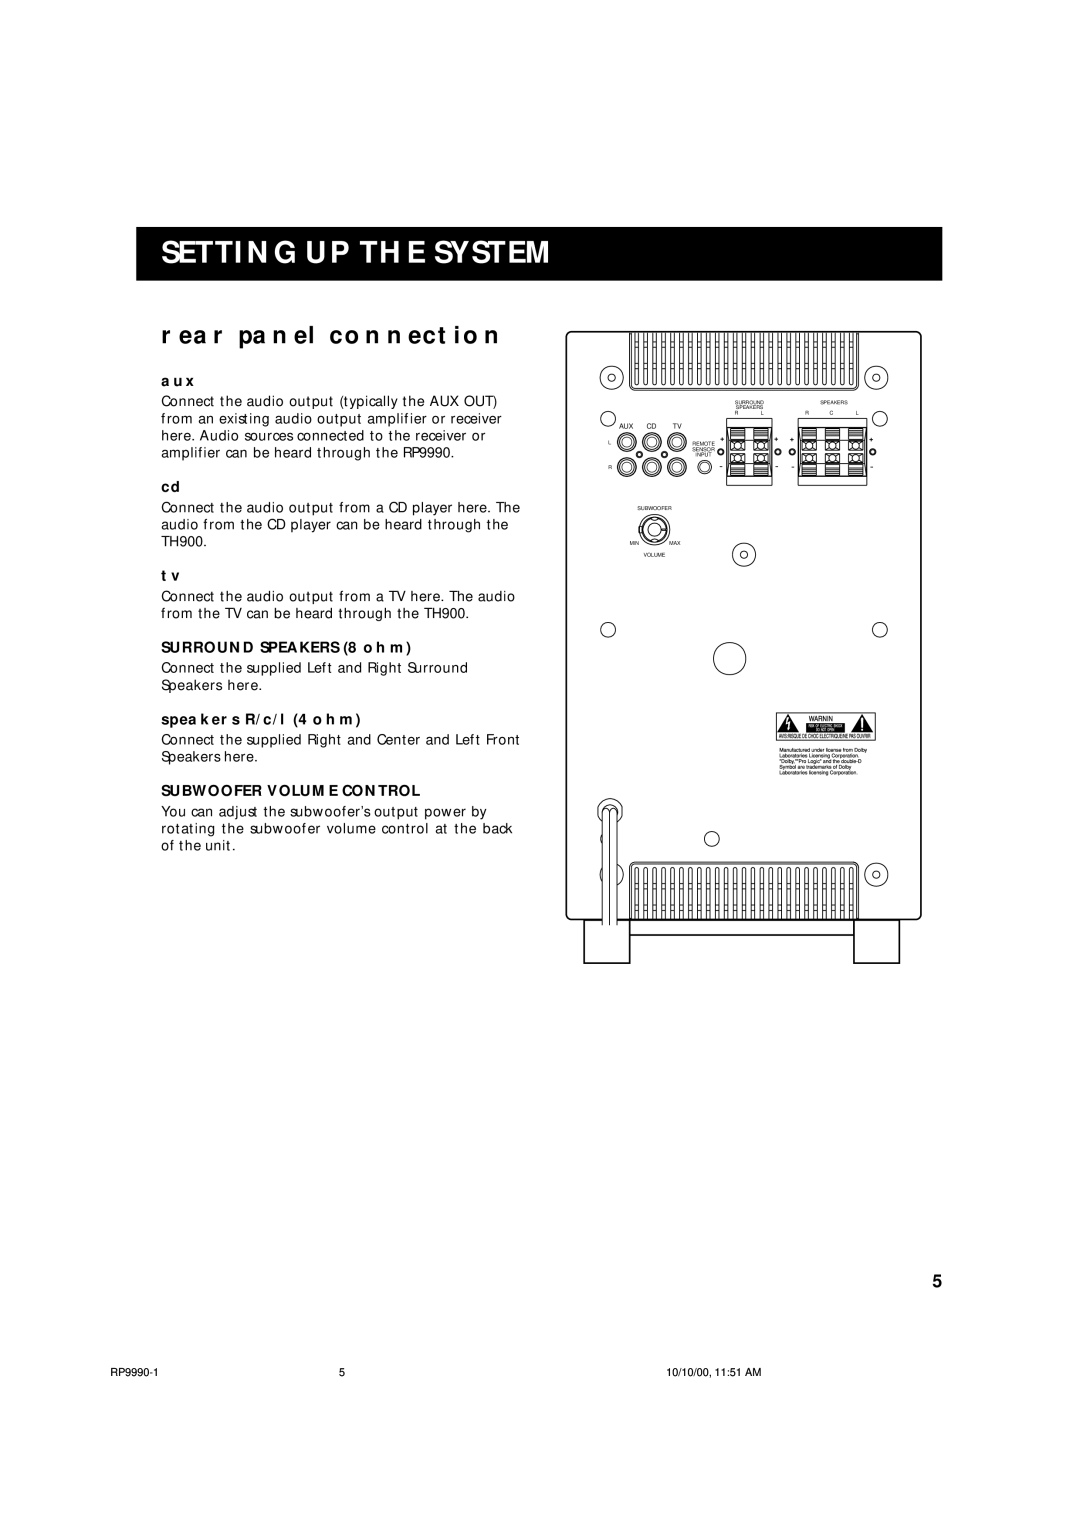 RCA RP-9990 manual Setting Up The System, Rear Panel Connection 